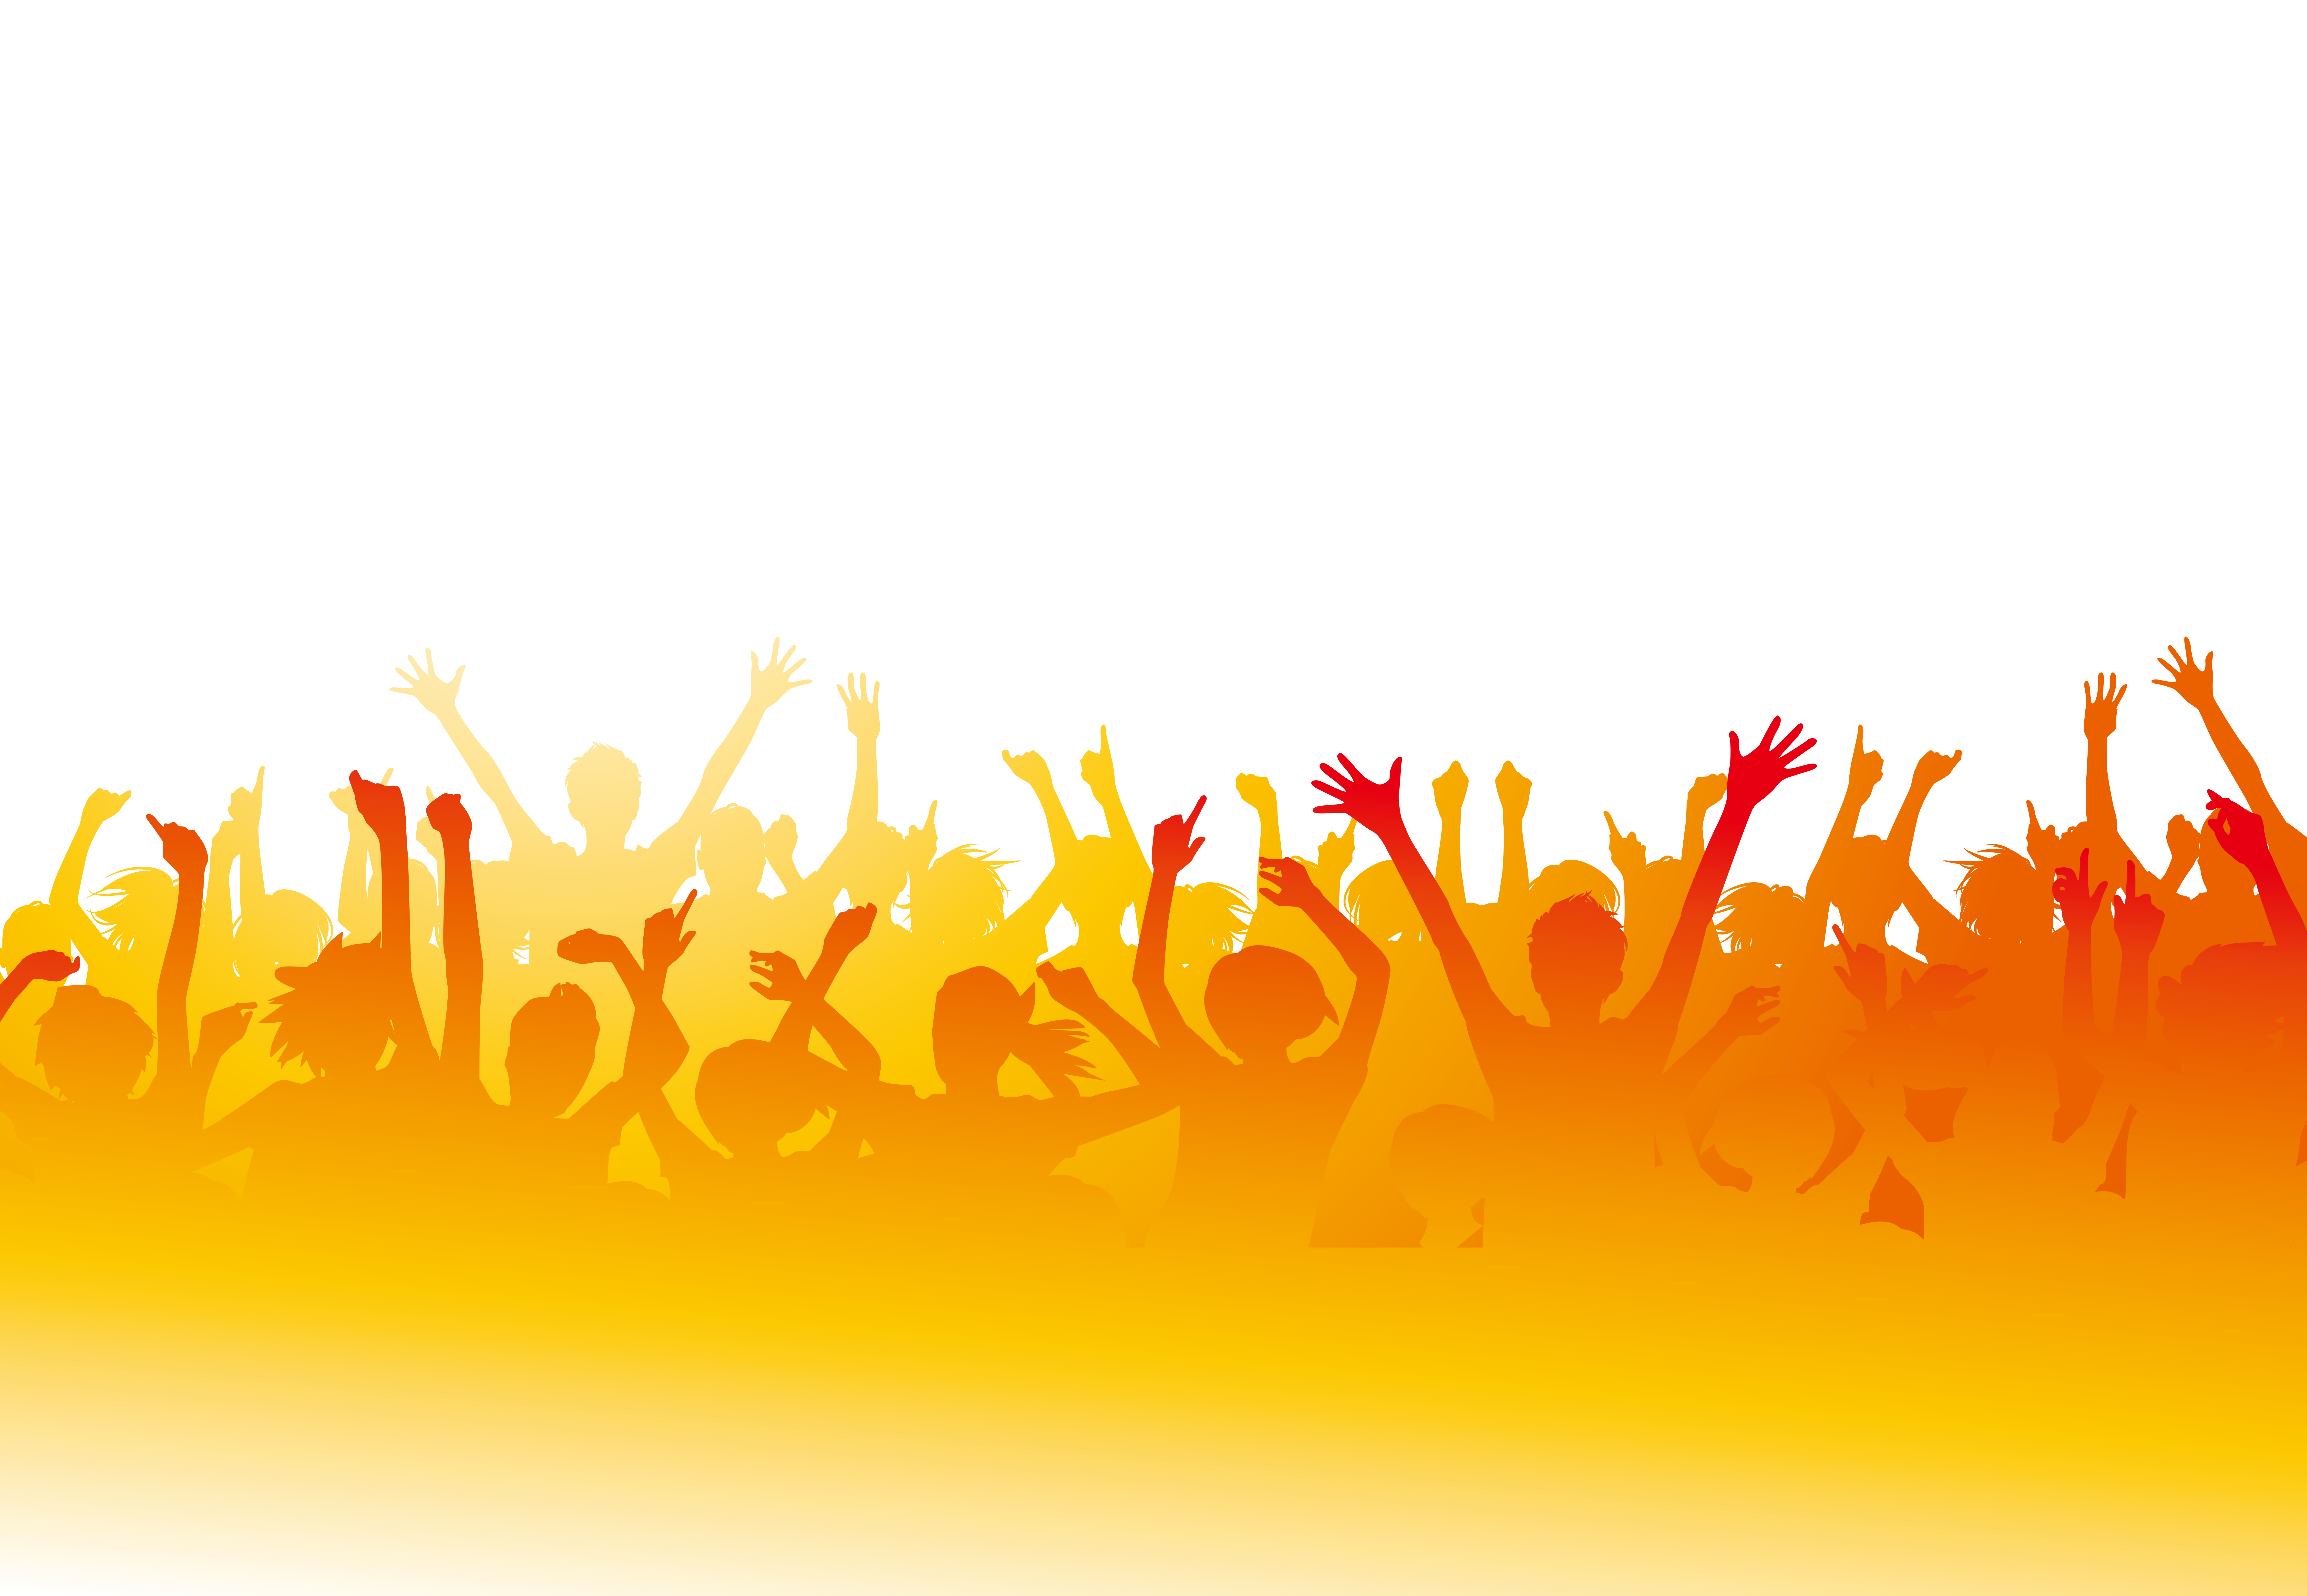 Crowd PNG HD and Transparent